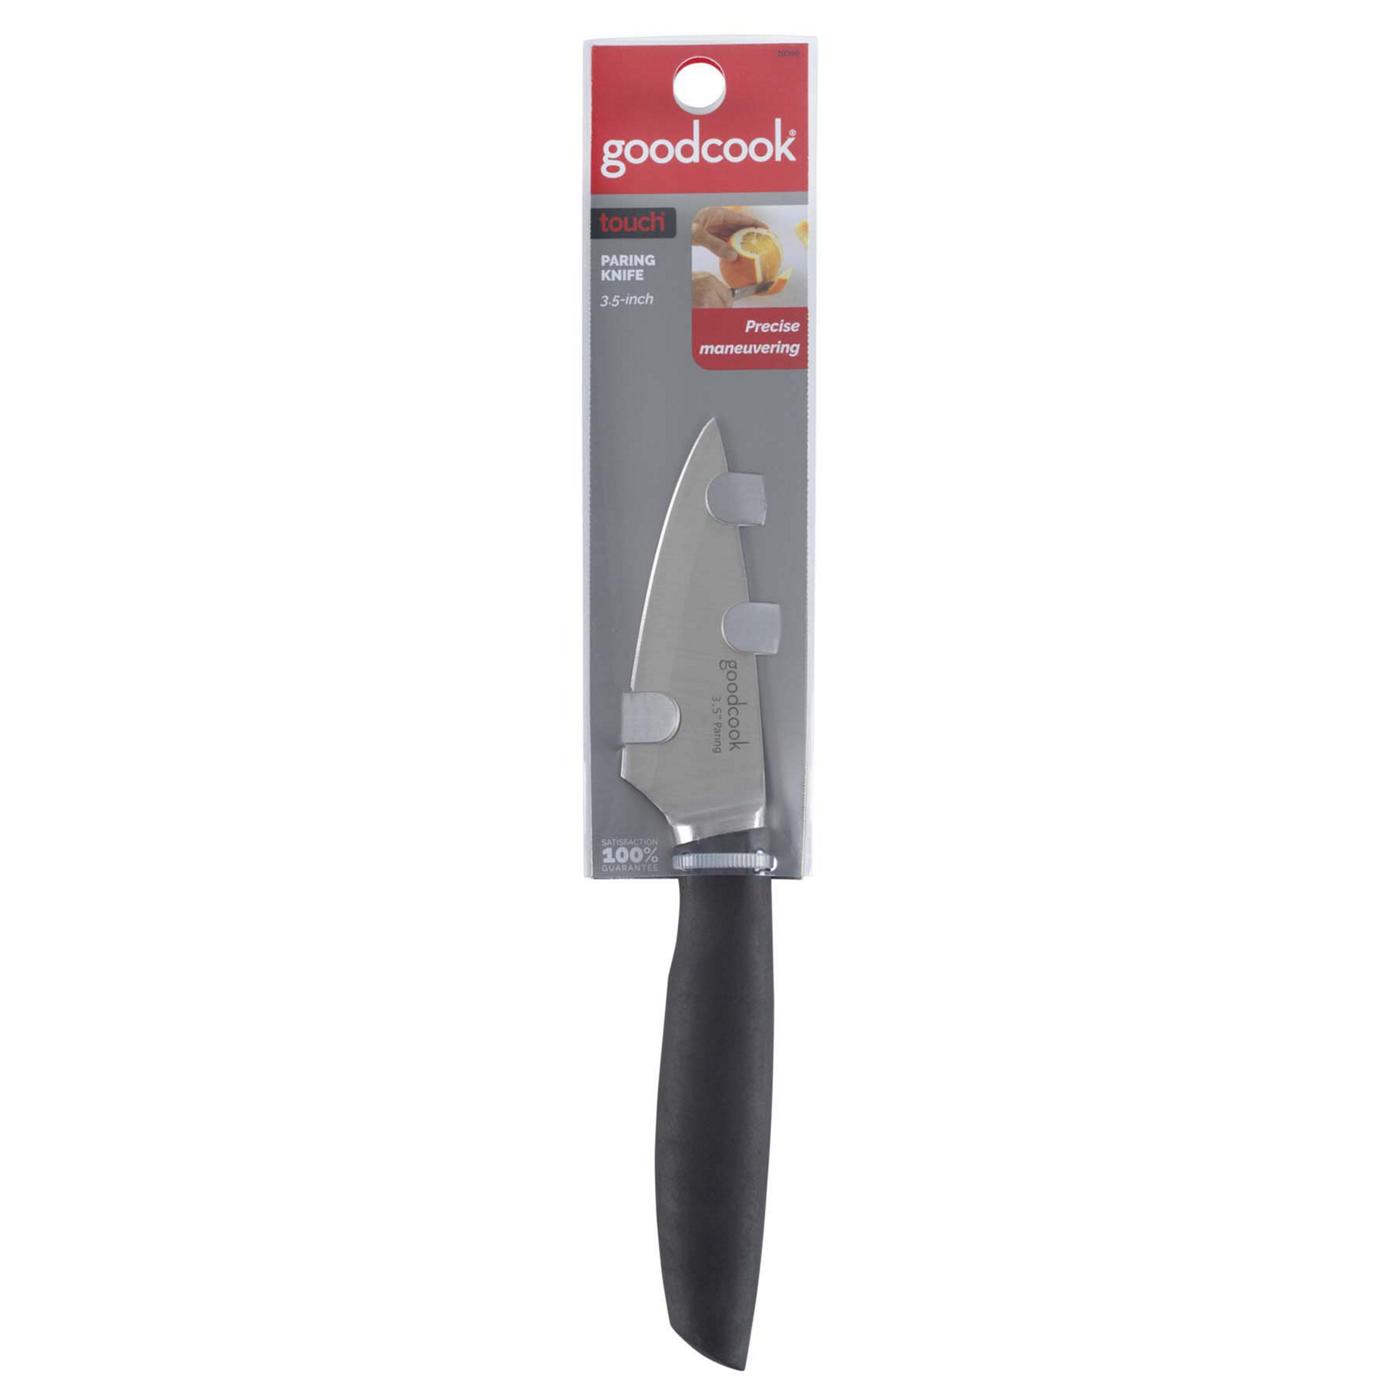 GoodCook Touch Paring Knife; image 1 of 4